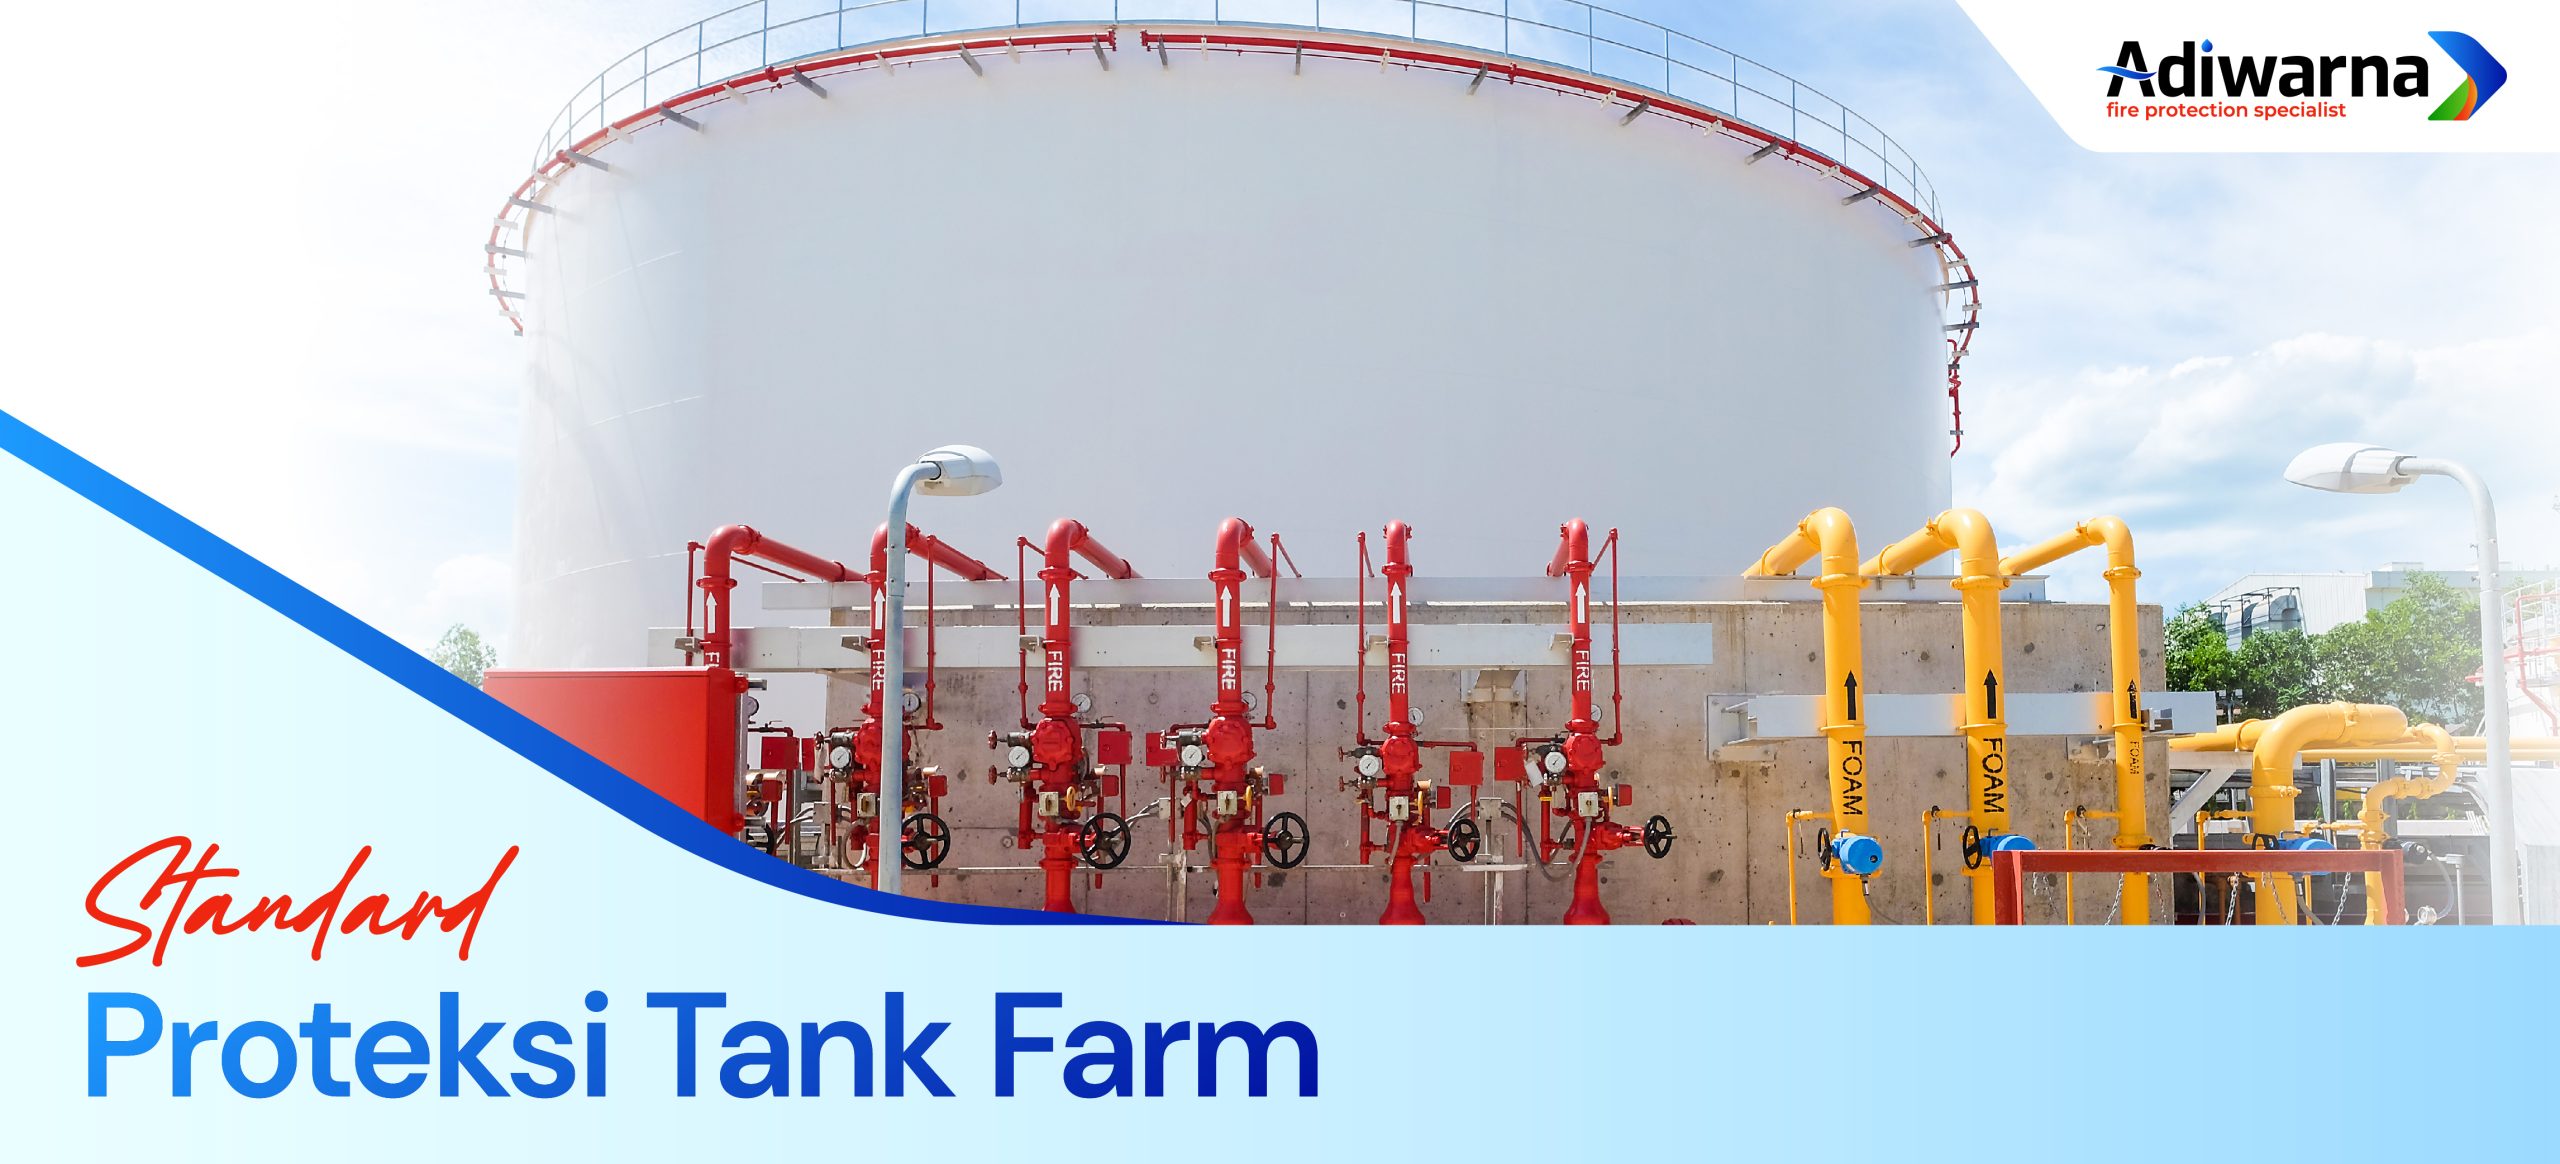 Standard Protection for Tank Farms